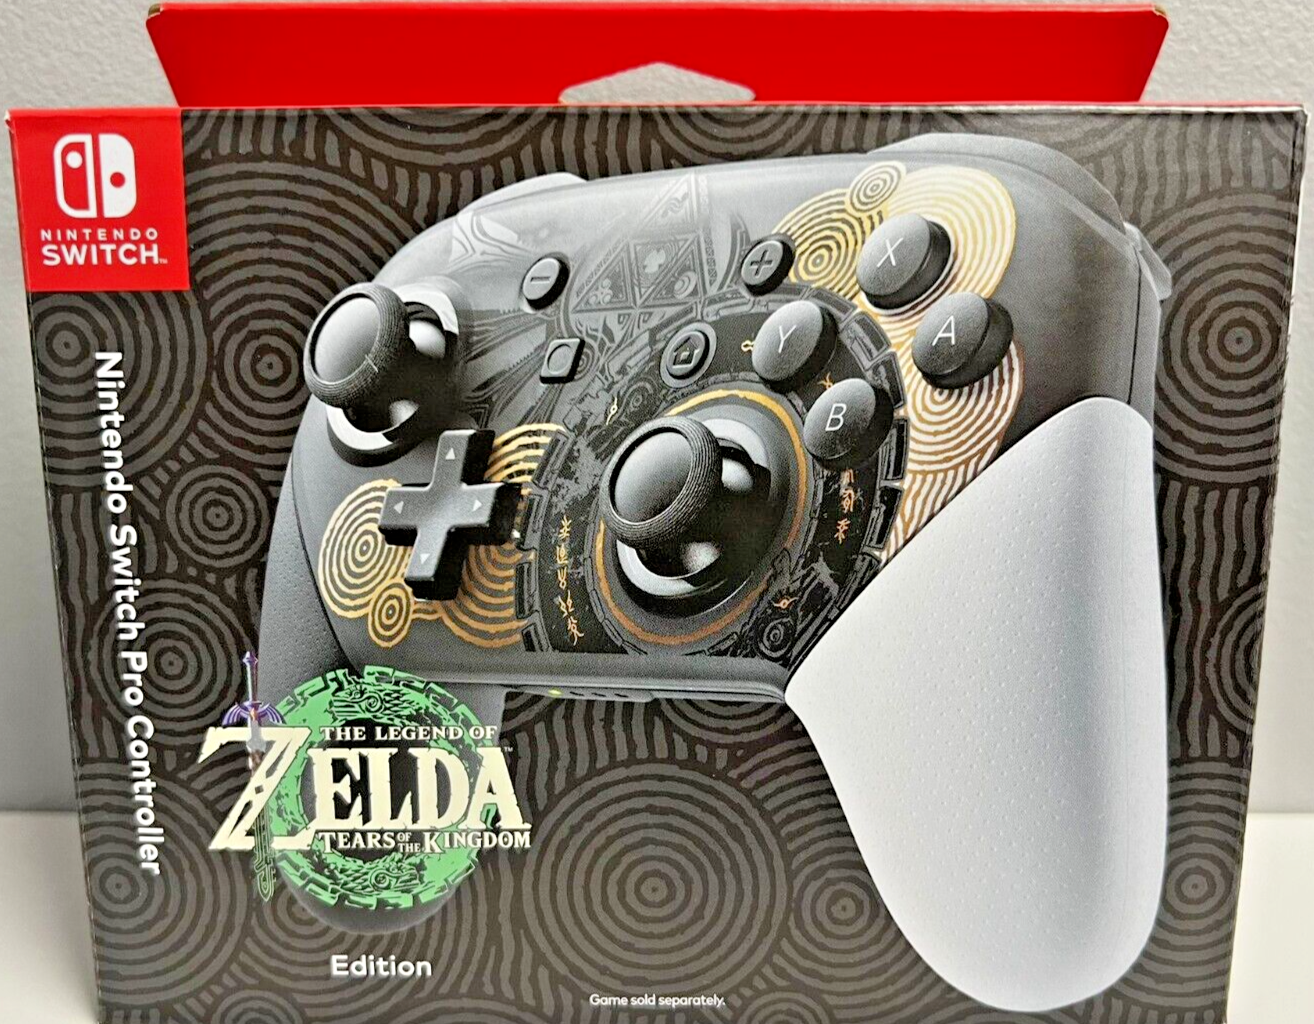  Nintendo Switch The Legend of Zelda: Tears of the Kingdom Edition Pro Controller [Middle East and Southeast Asia]